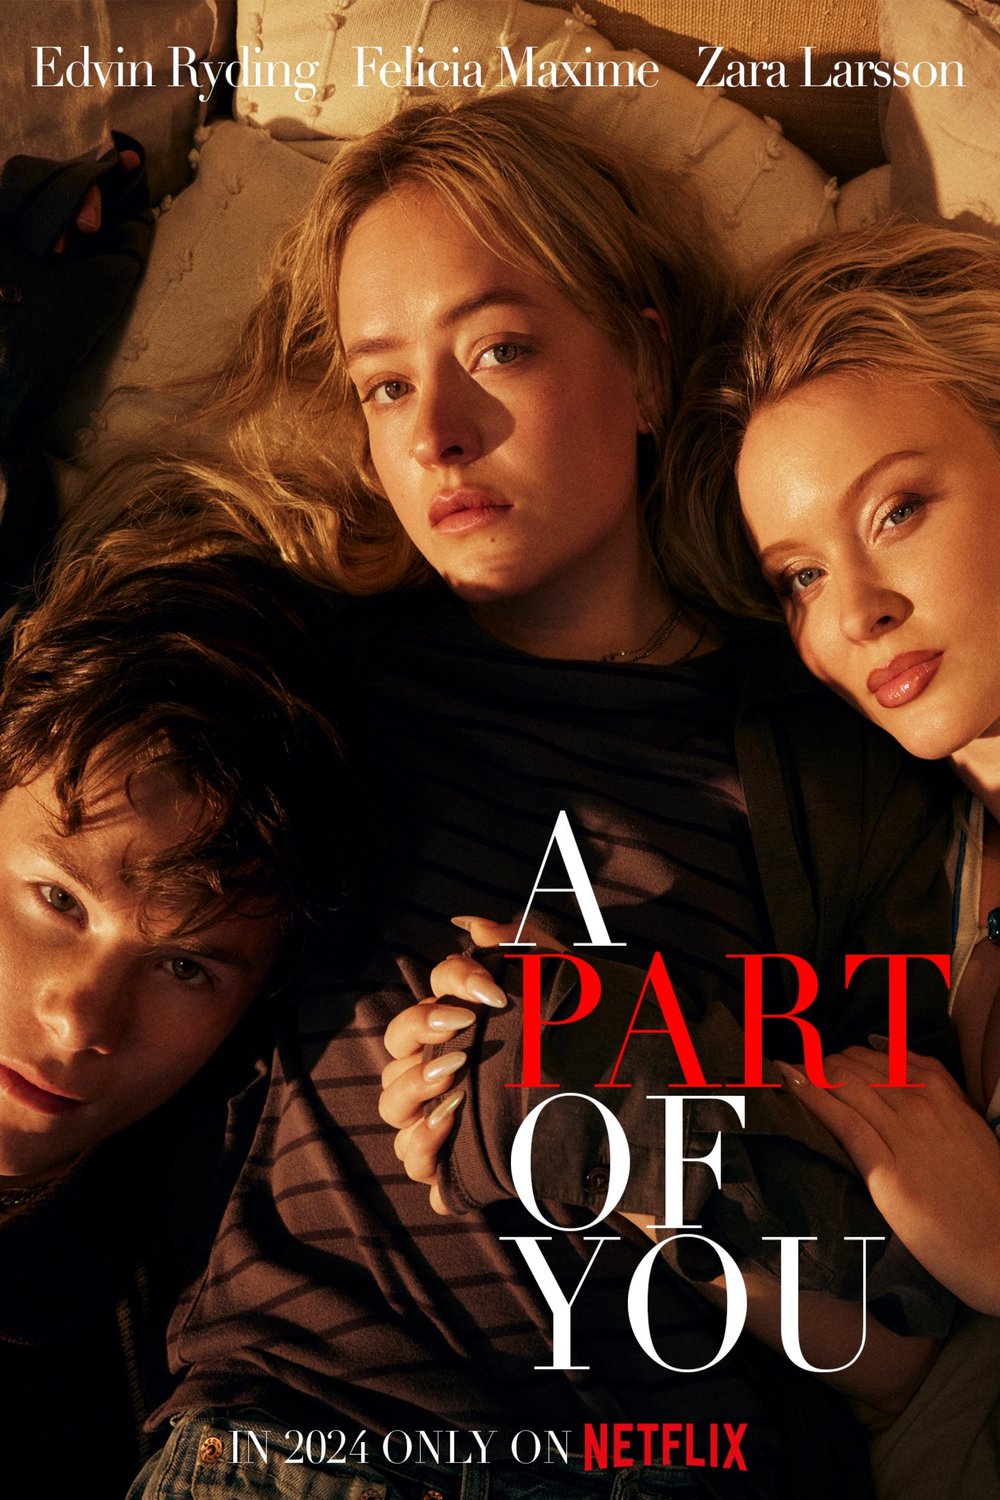 Poster of the movie A Part of You